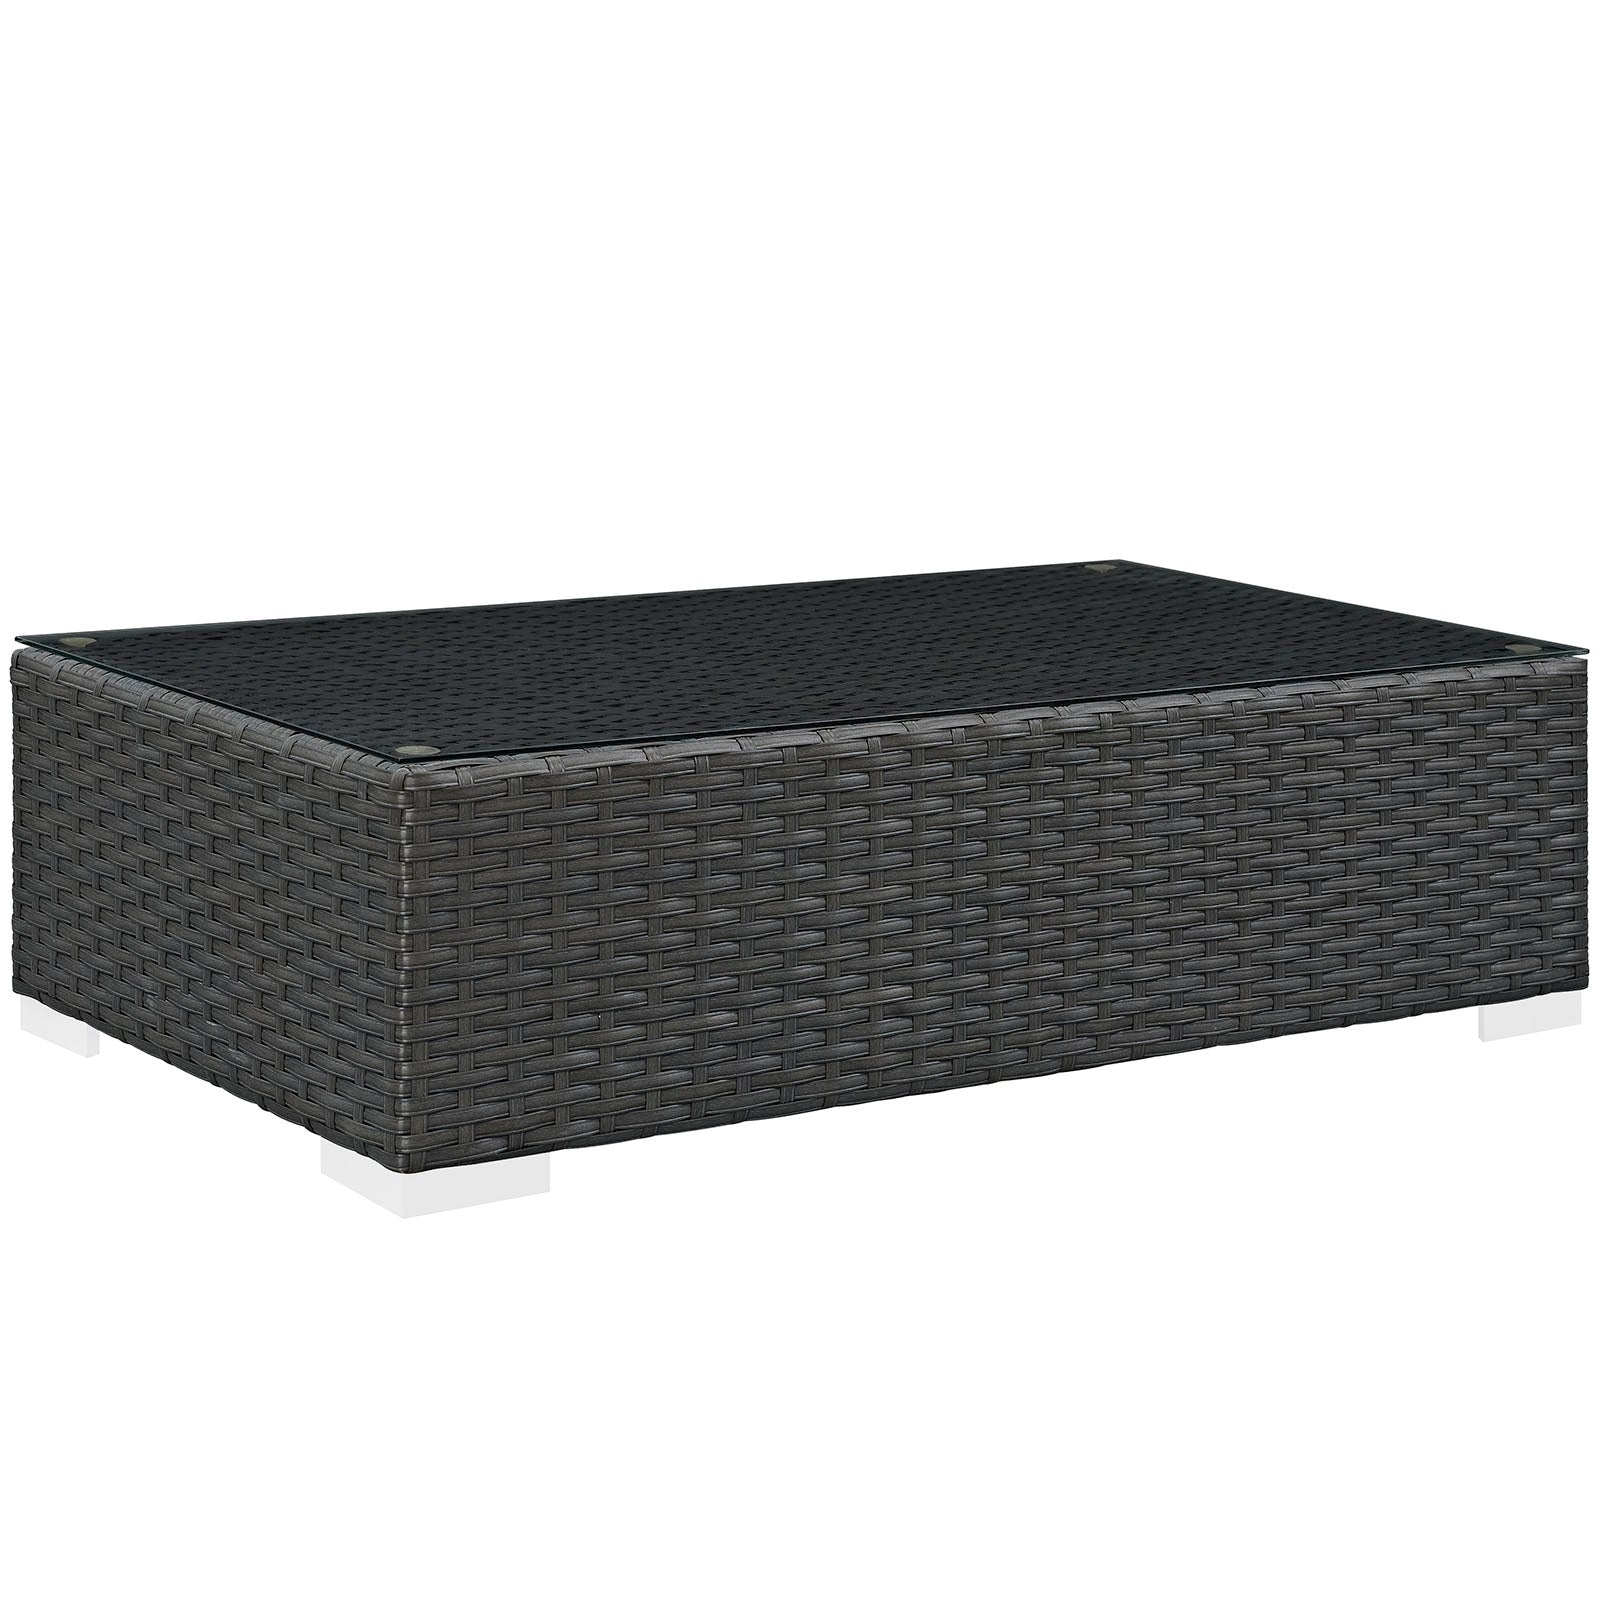 Sojourn Outdoor Patio Coffee Table - East Shore Modern Home Furnishings